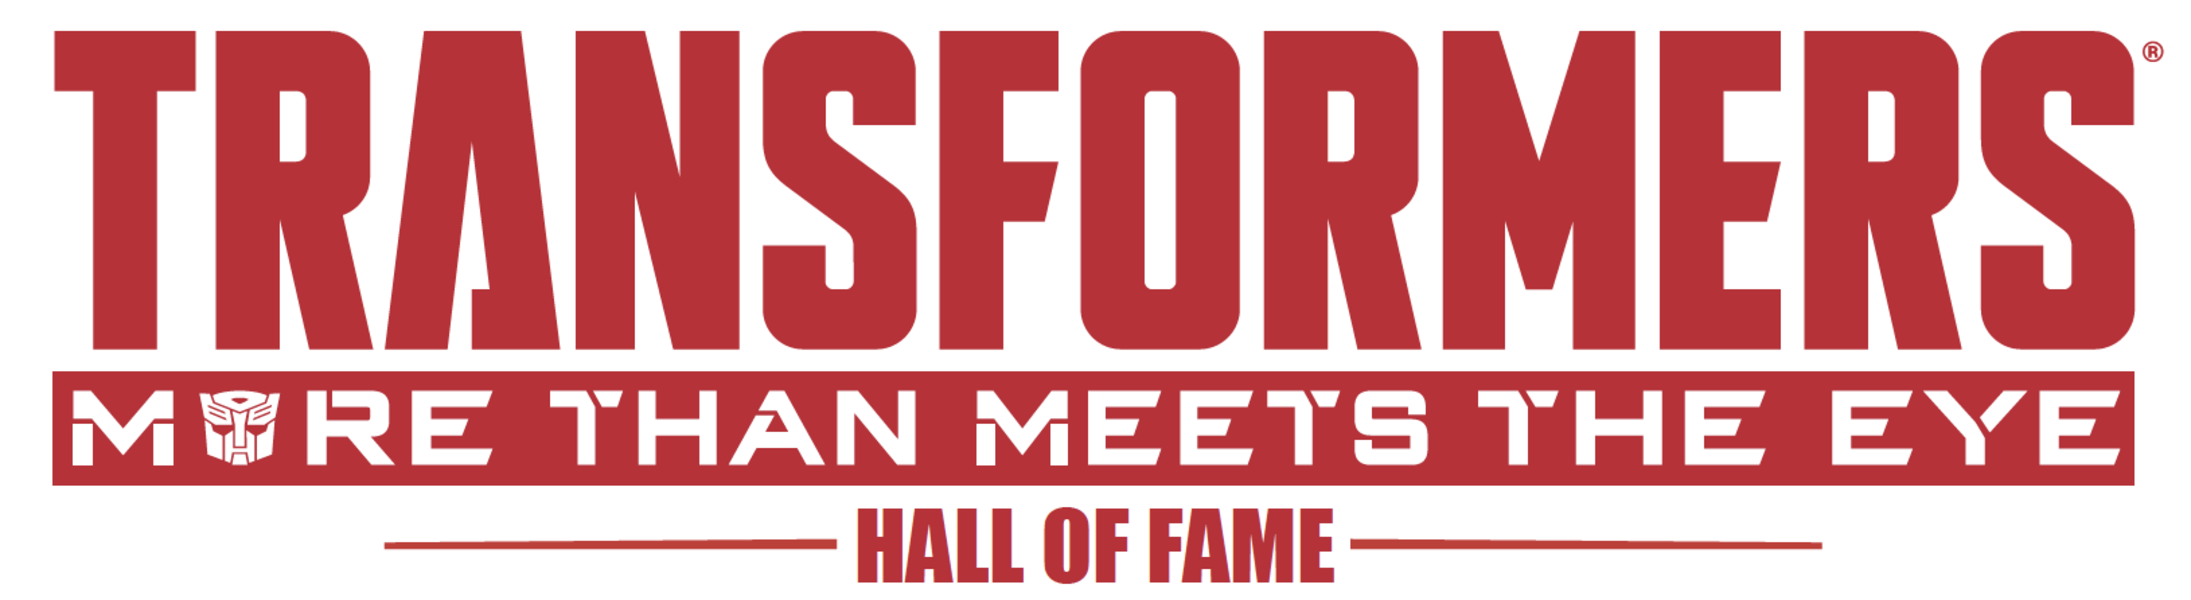 2020 Transformers Hall of Fame Inductee Voting Begins!